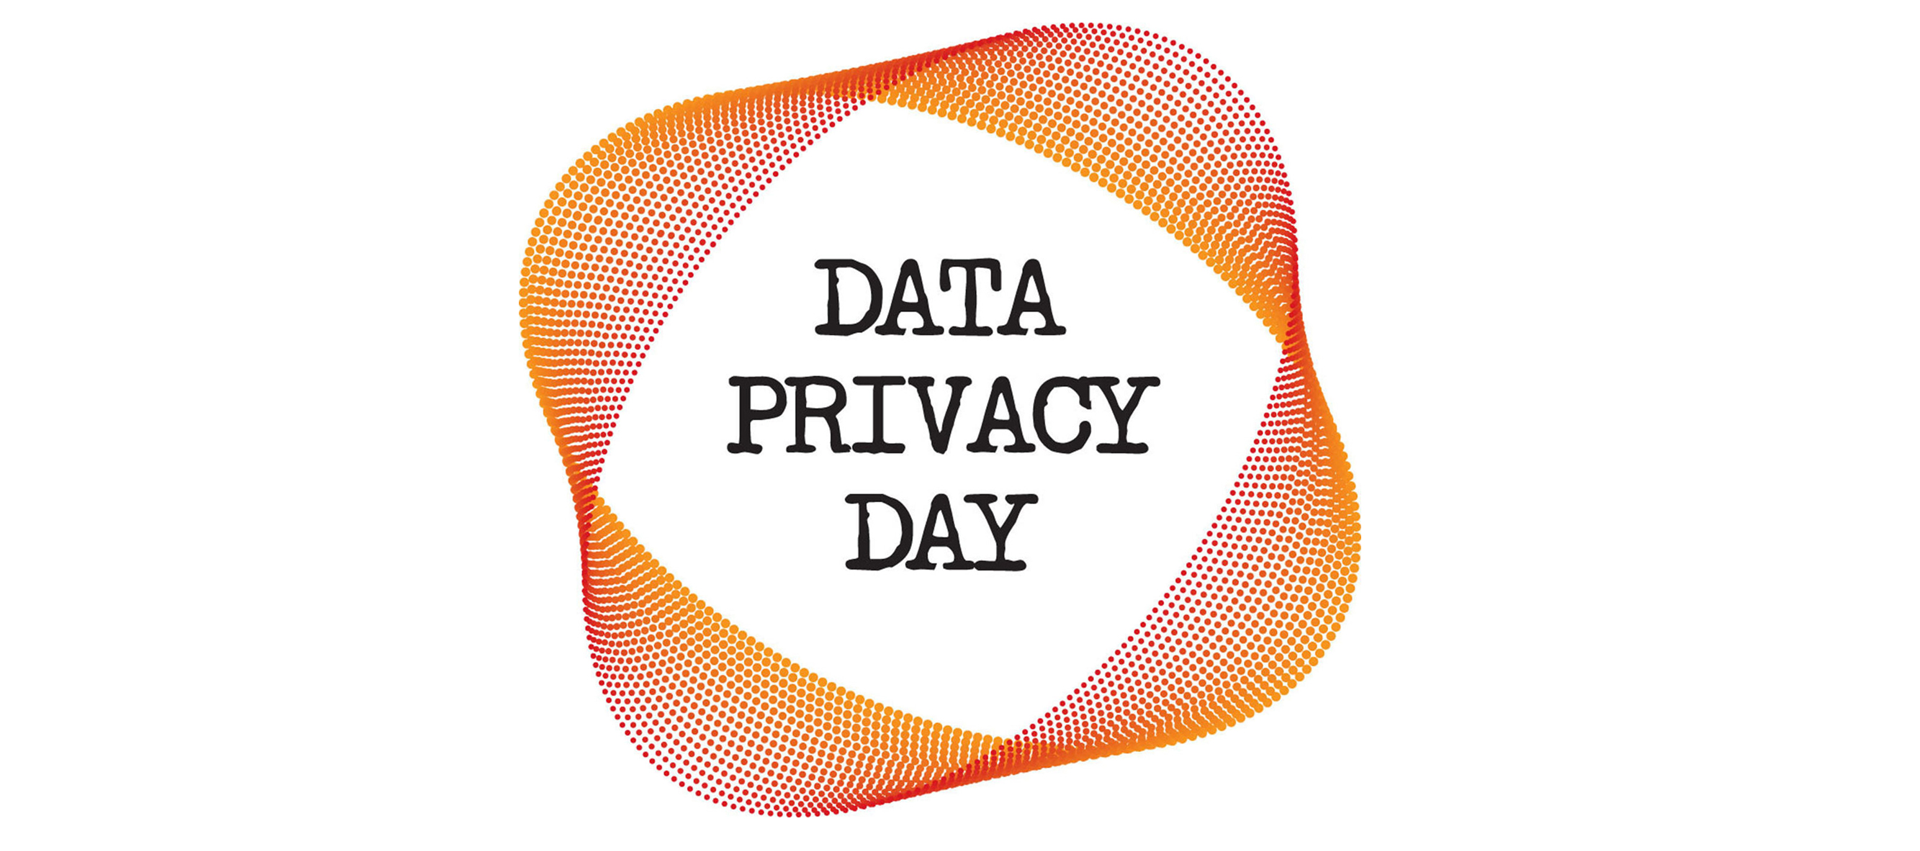 Data Privacy Day Should Come 365 Times a Year